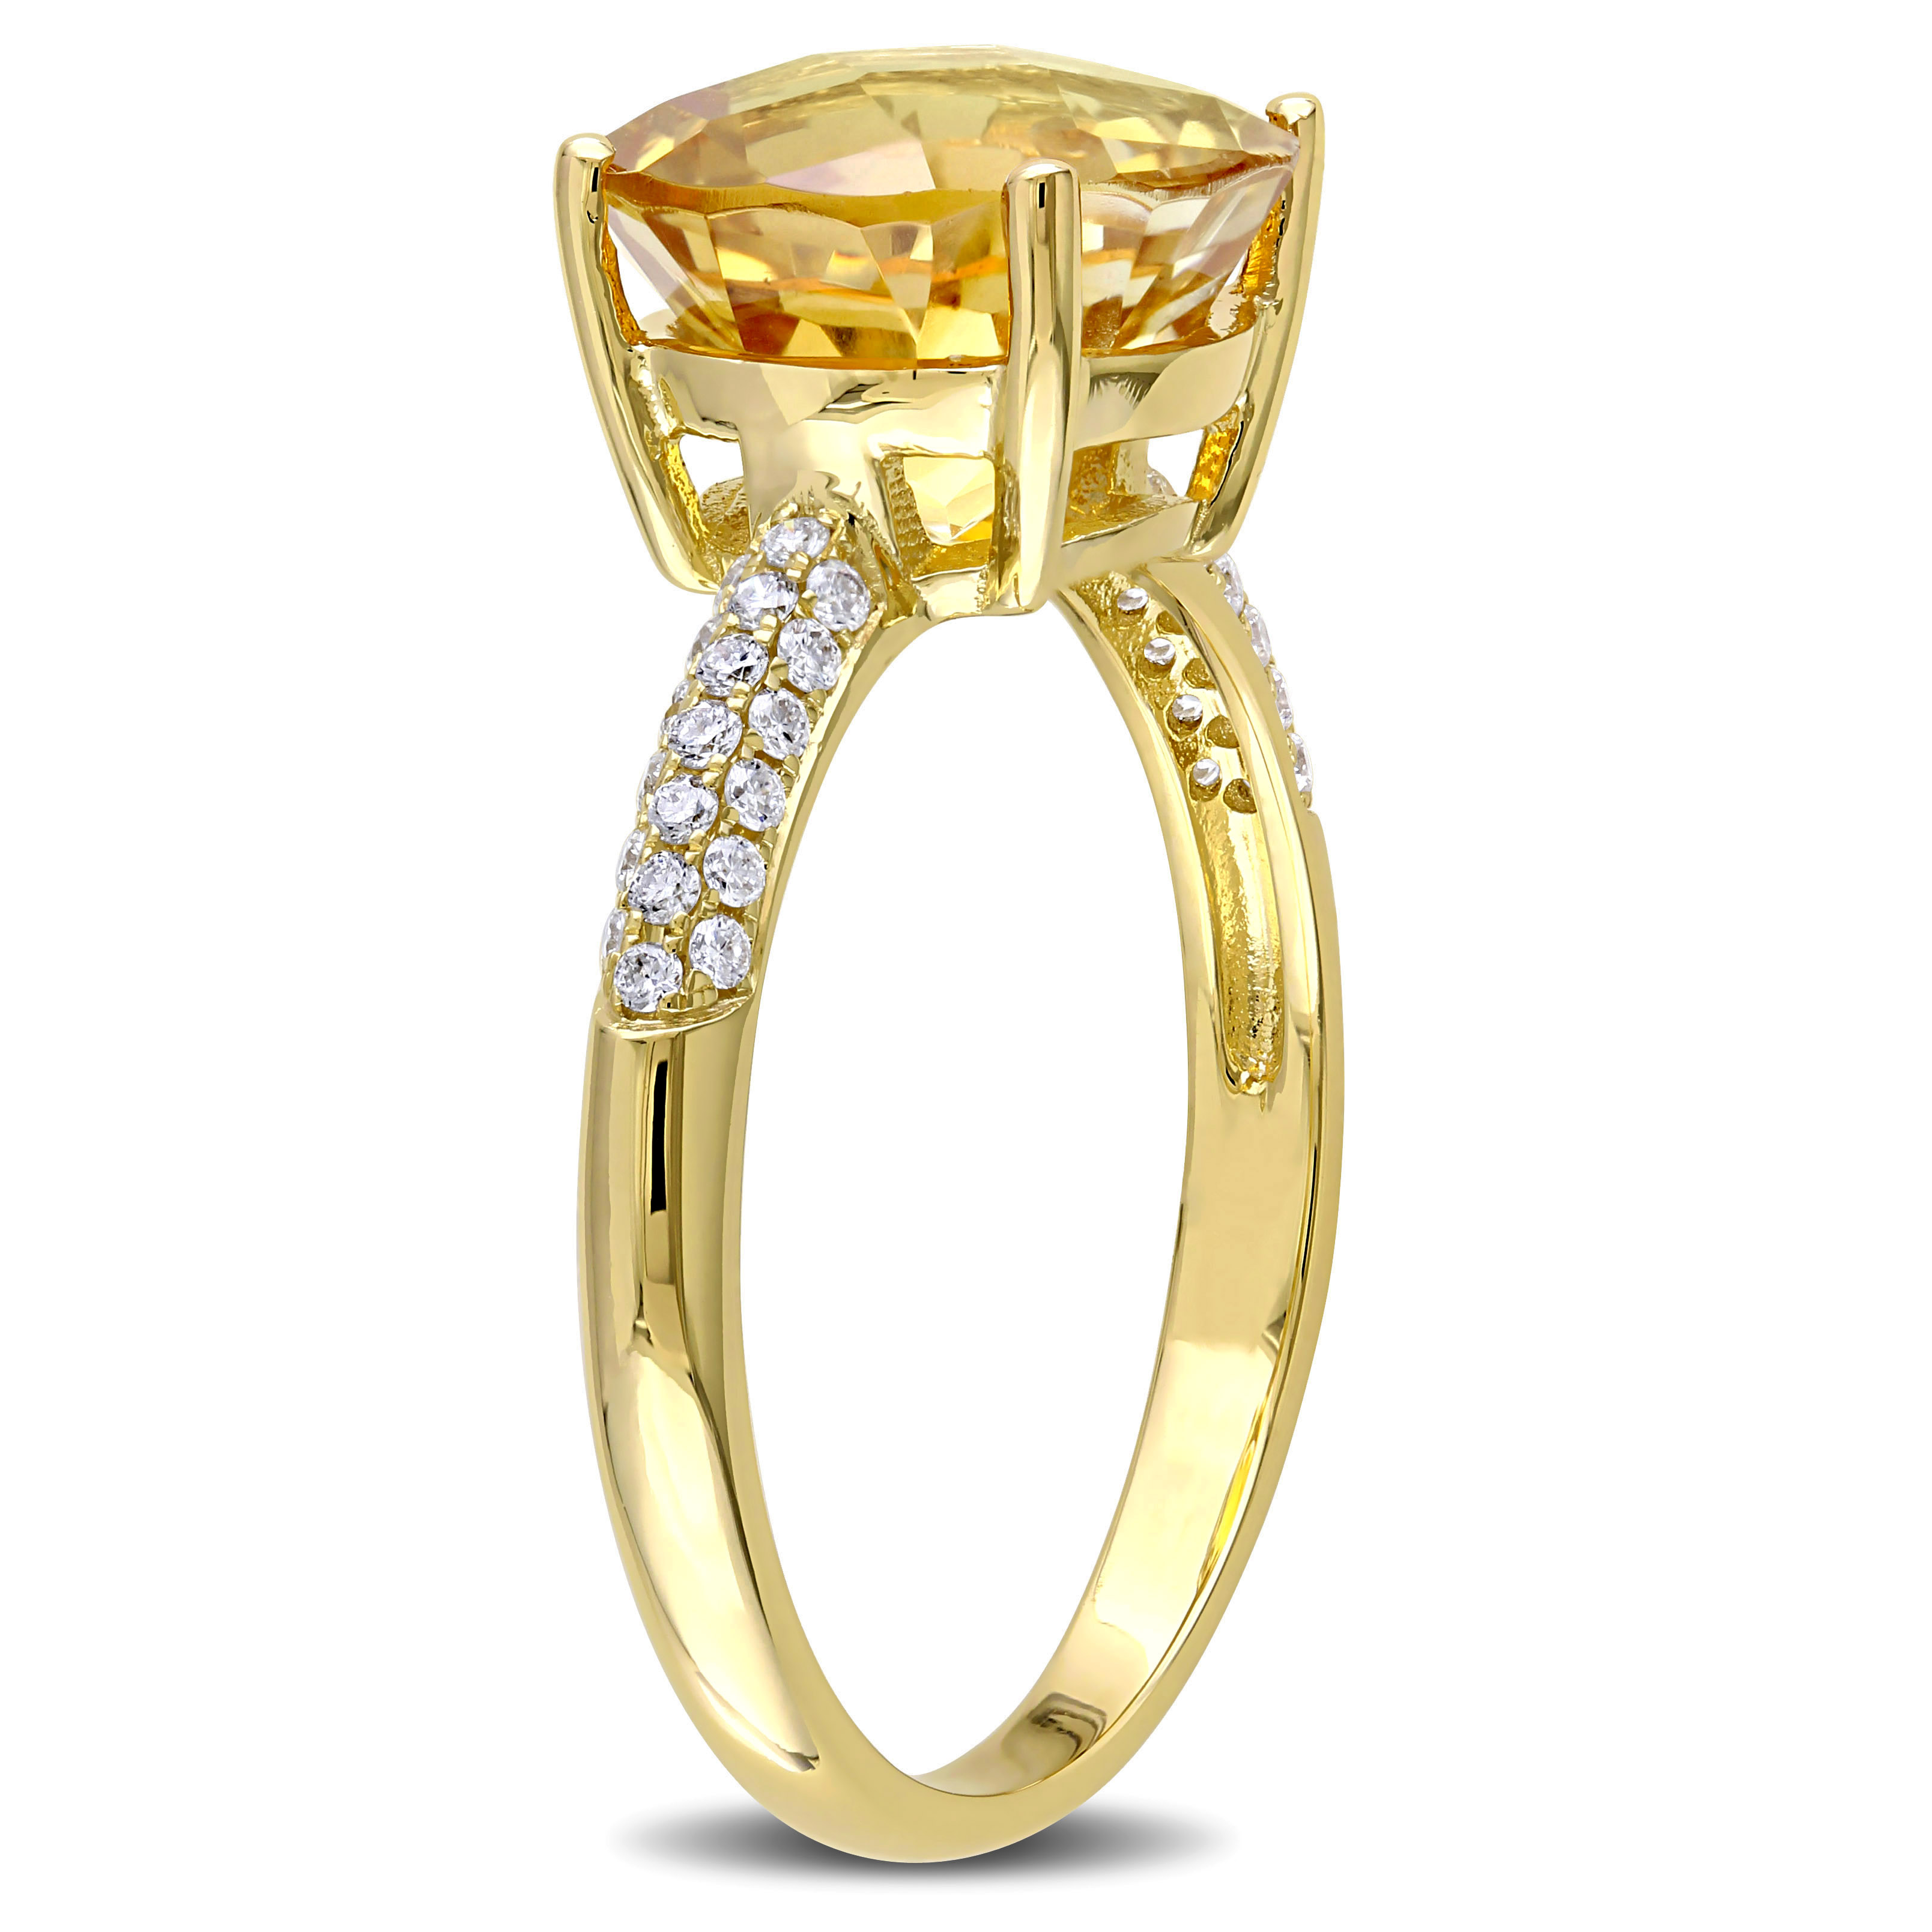 3 1/3 CT TGW Citrine and 1/5 CT TW Diamond Beaded Ring in 14k Yellow Gold